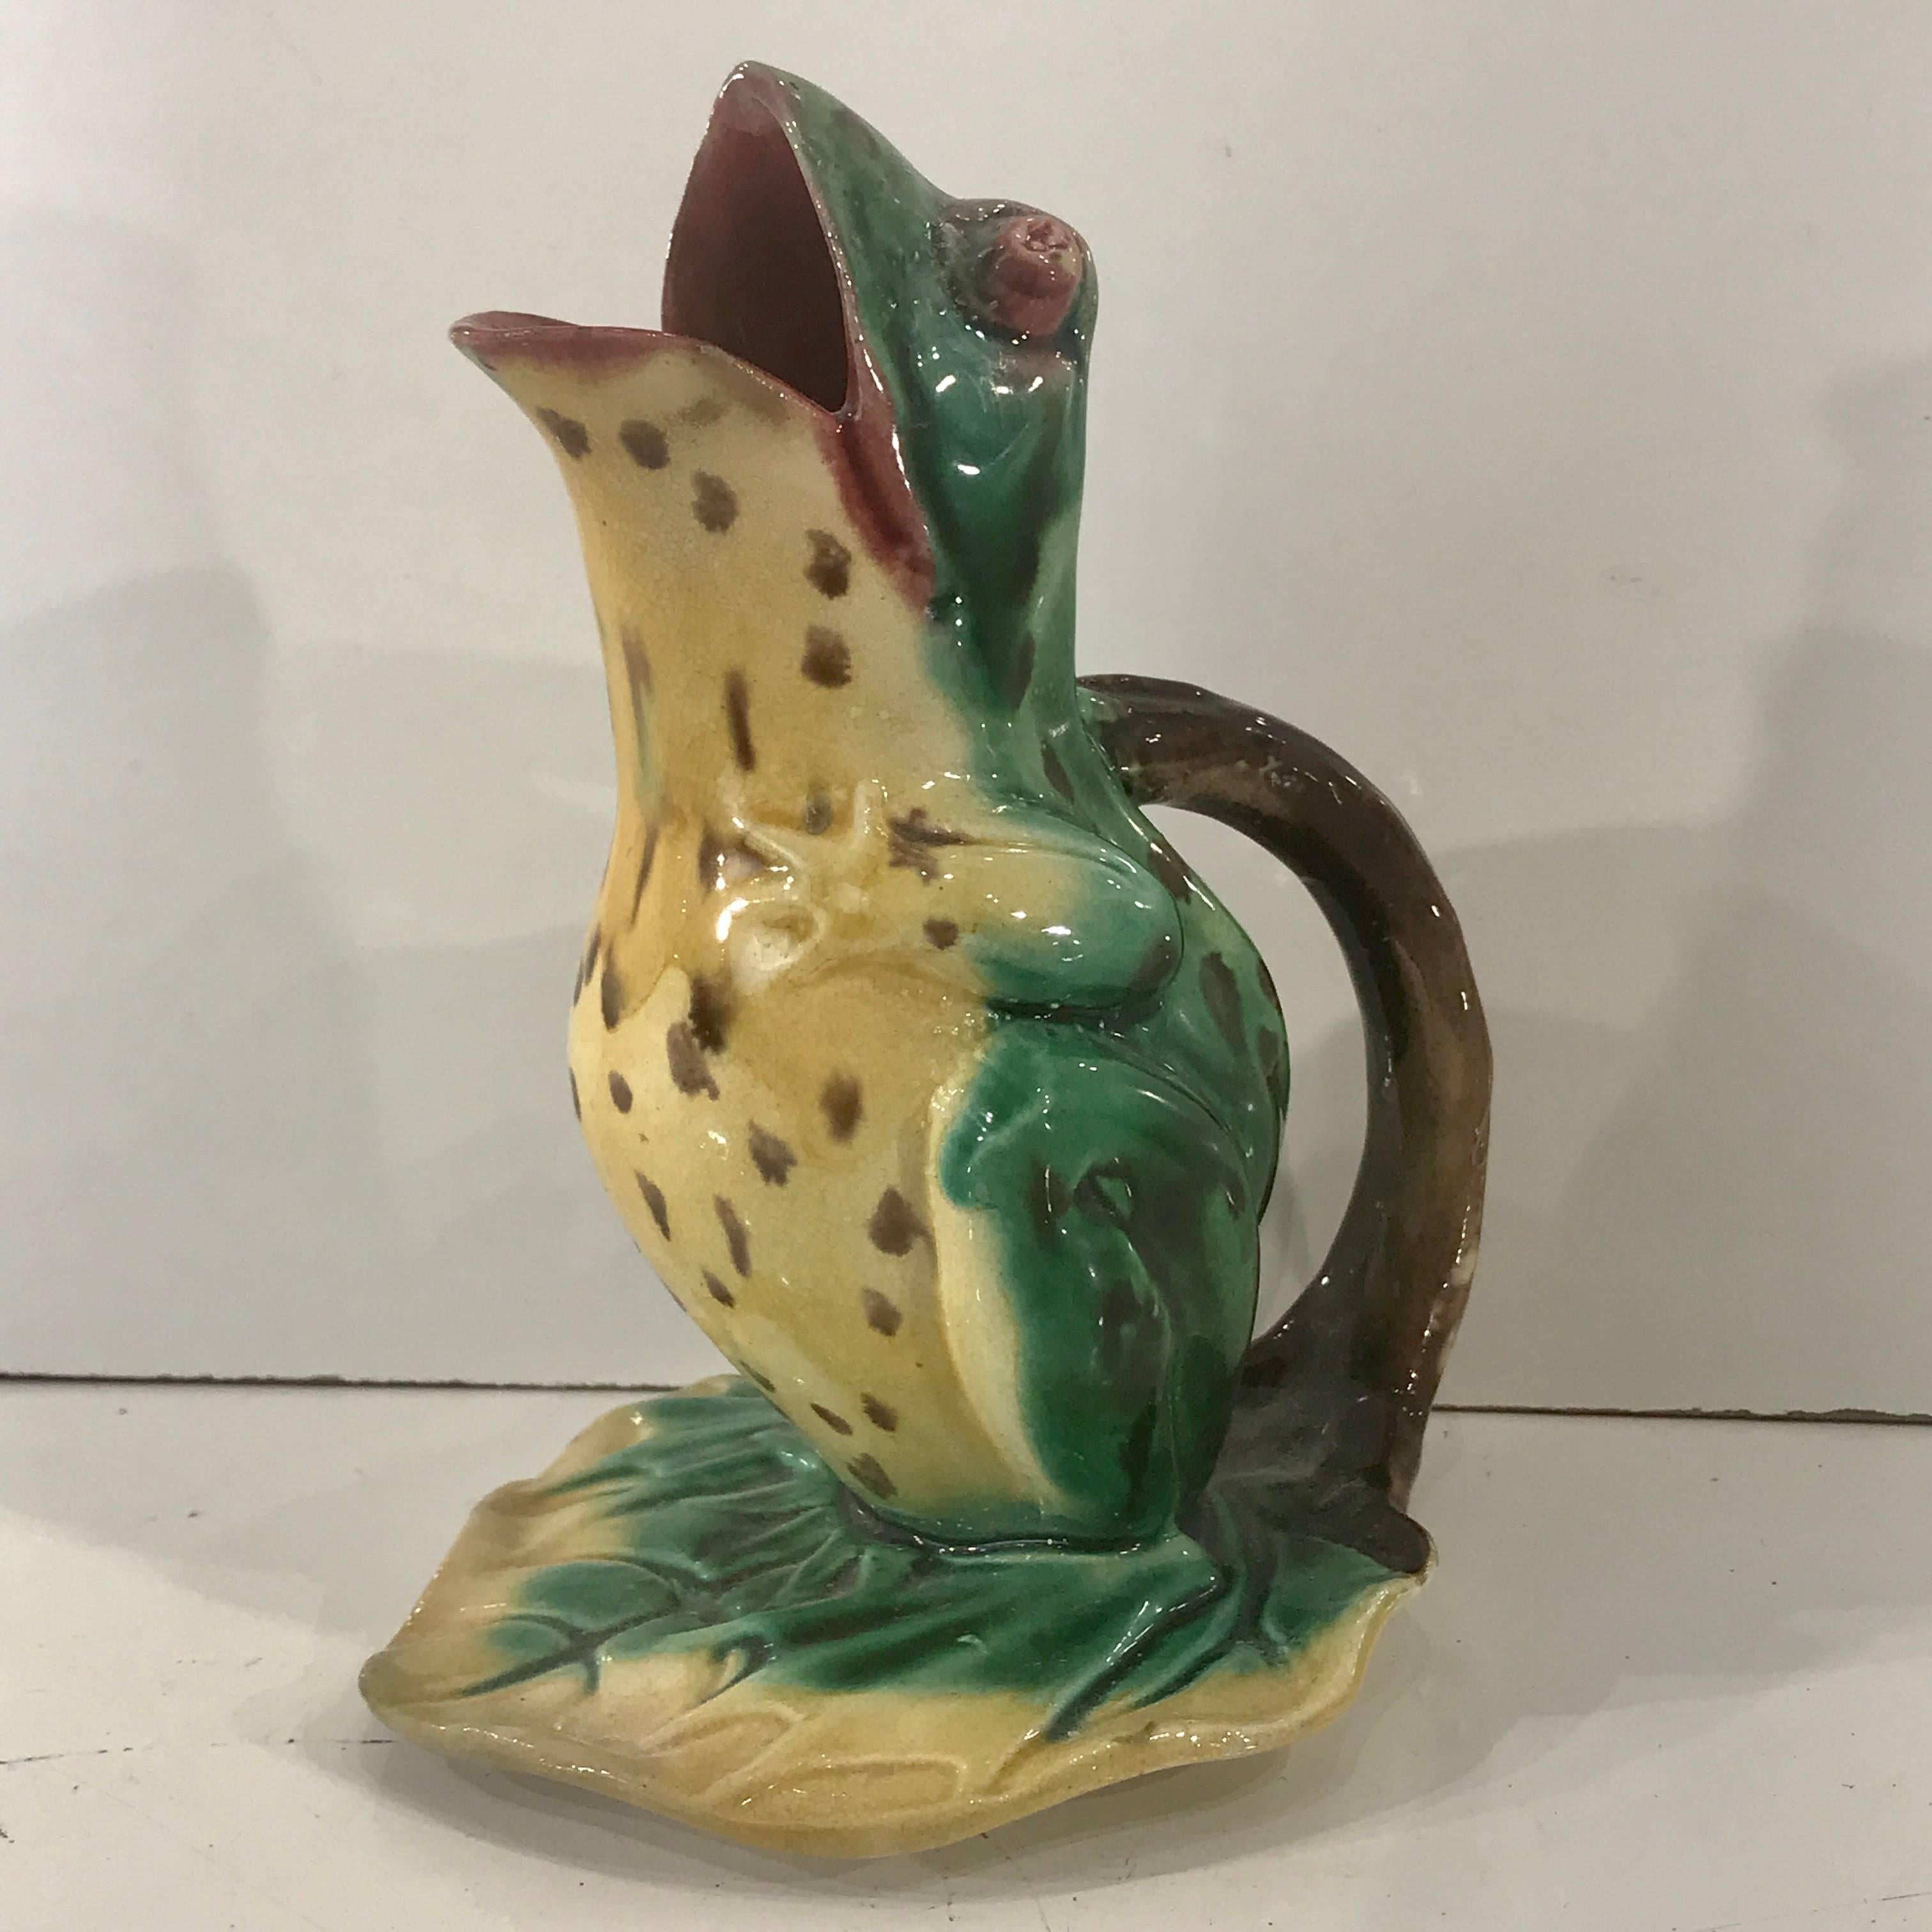 19th century English Majolica Frog Pitcher by Edward Steele 2